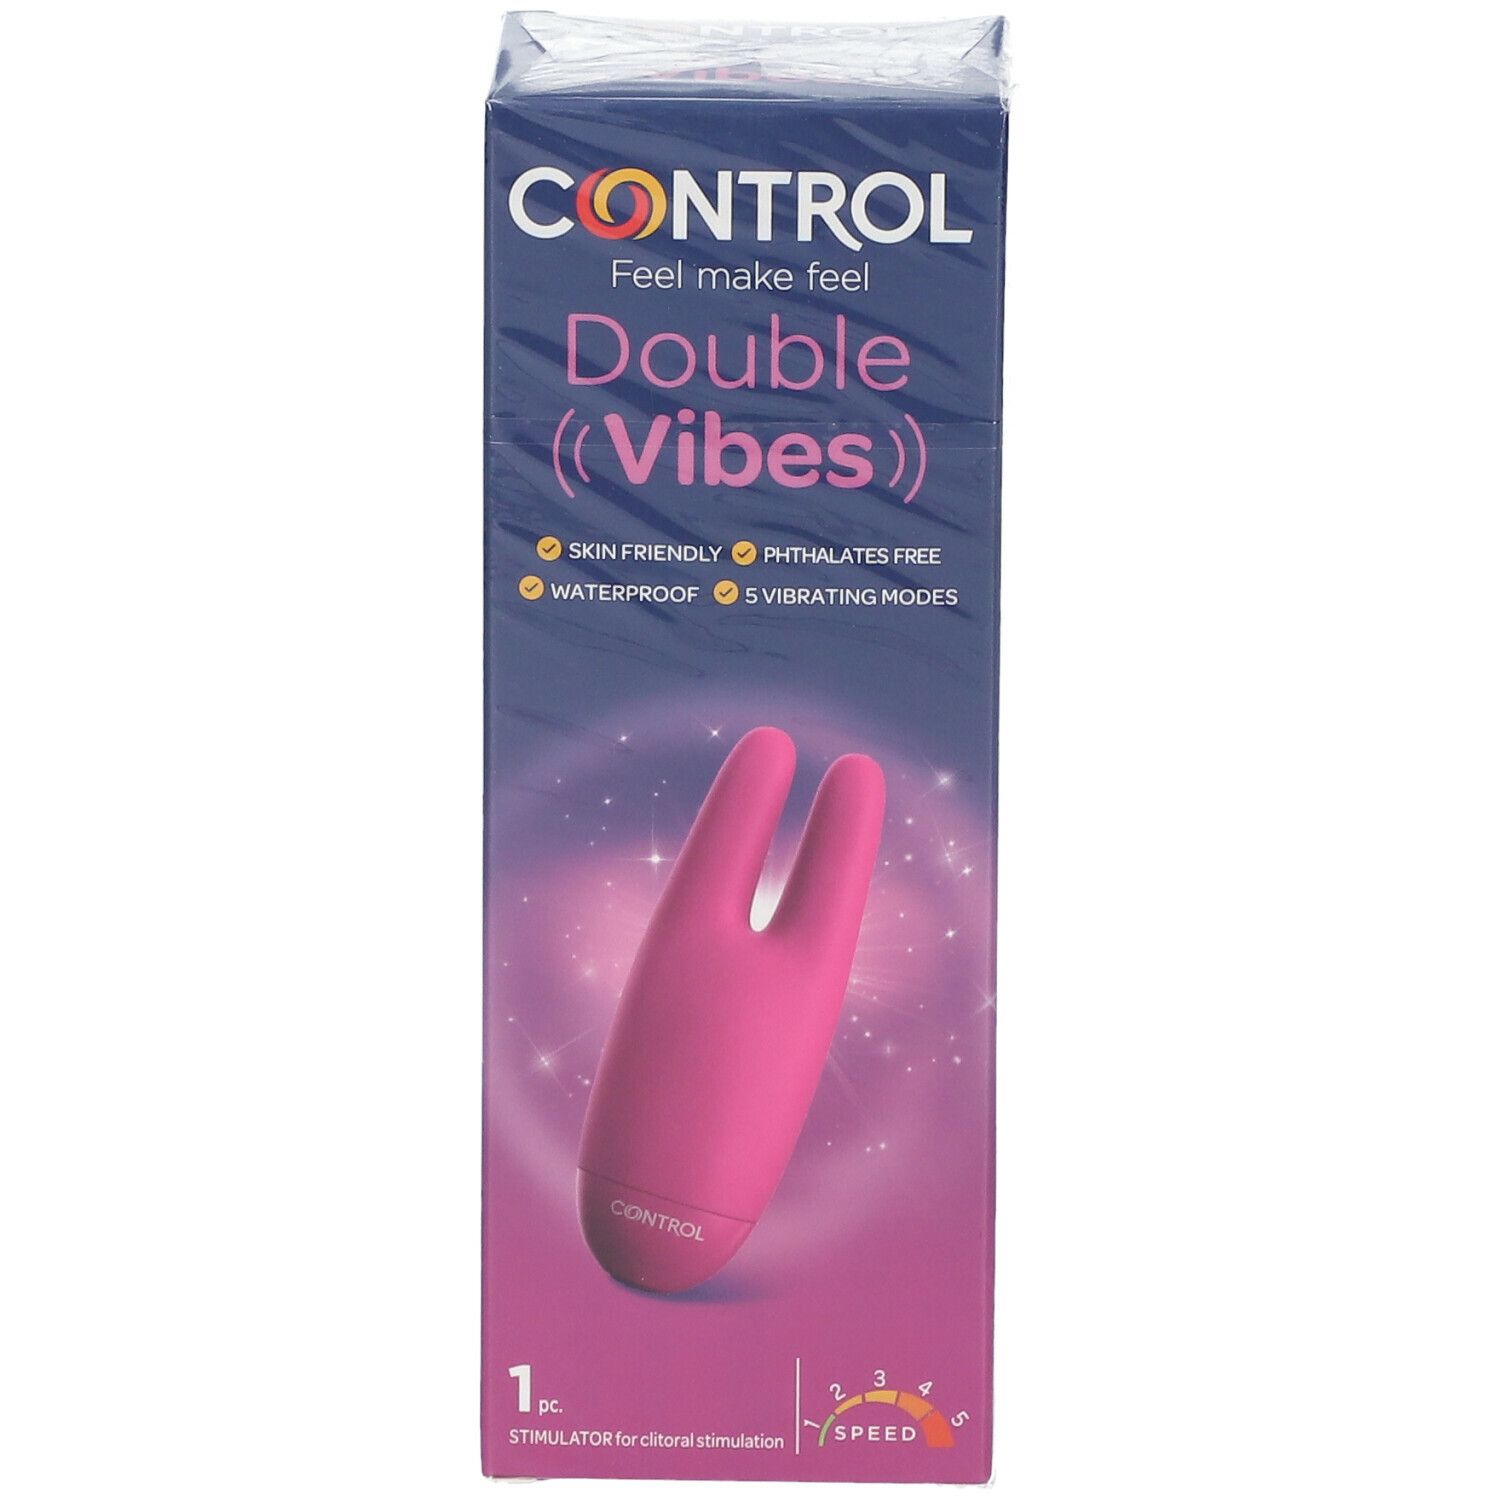 CONTROL Double Vibes